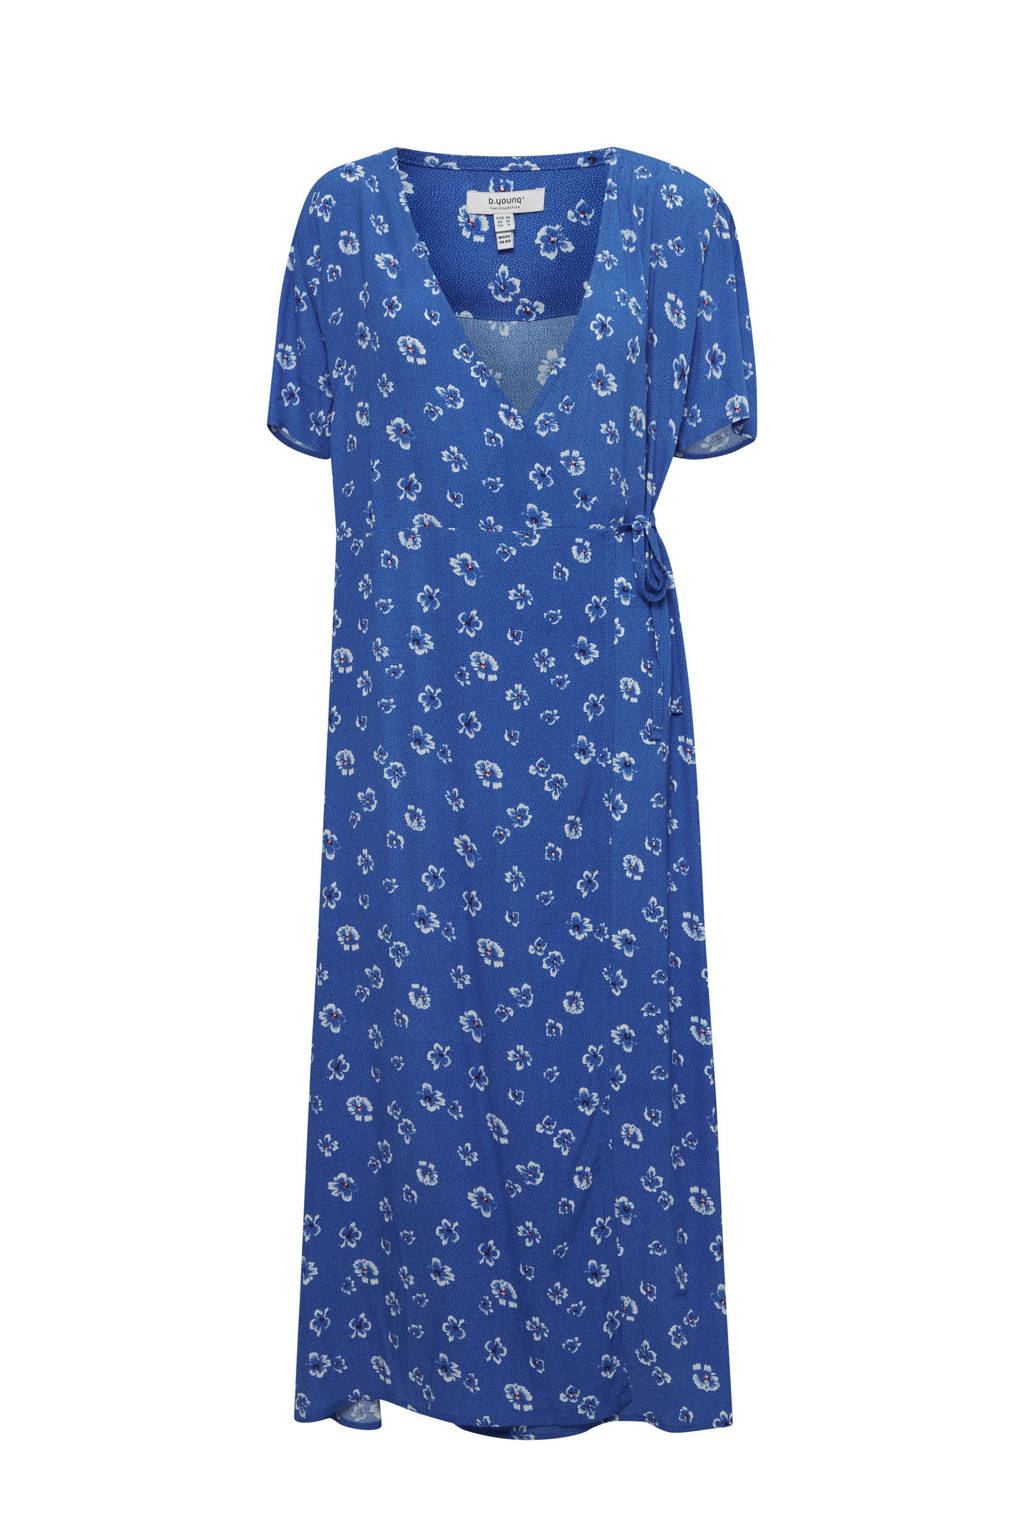 B.Young maxi wikkeljurk BYIATHENS  met all over print blauw